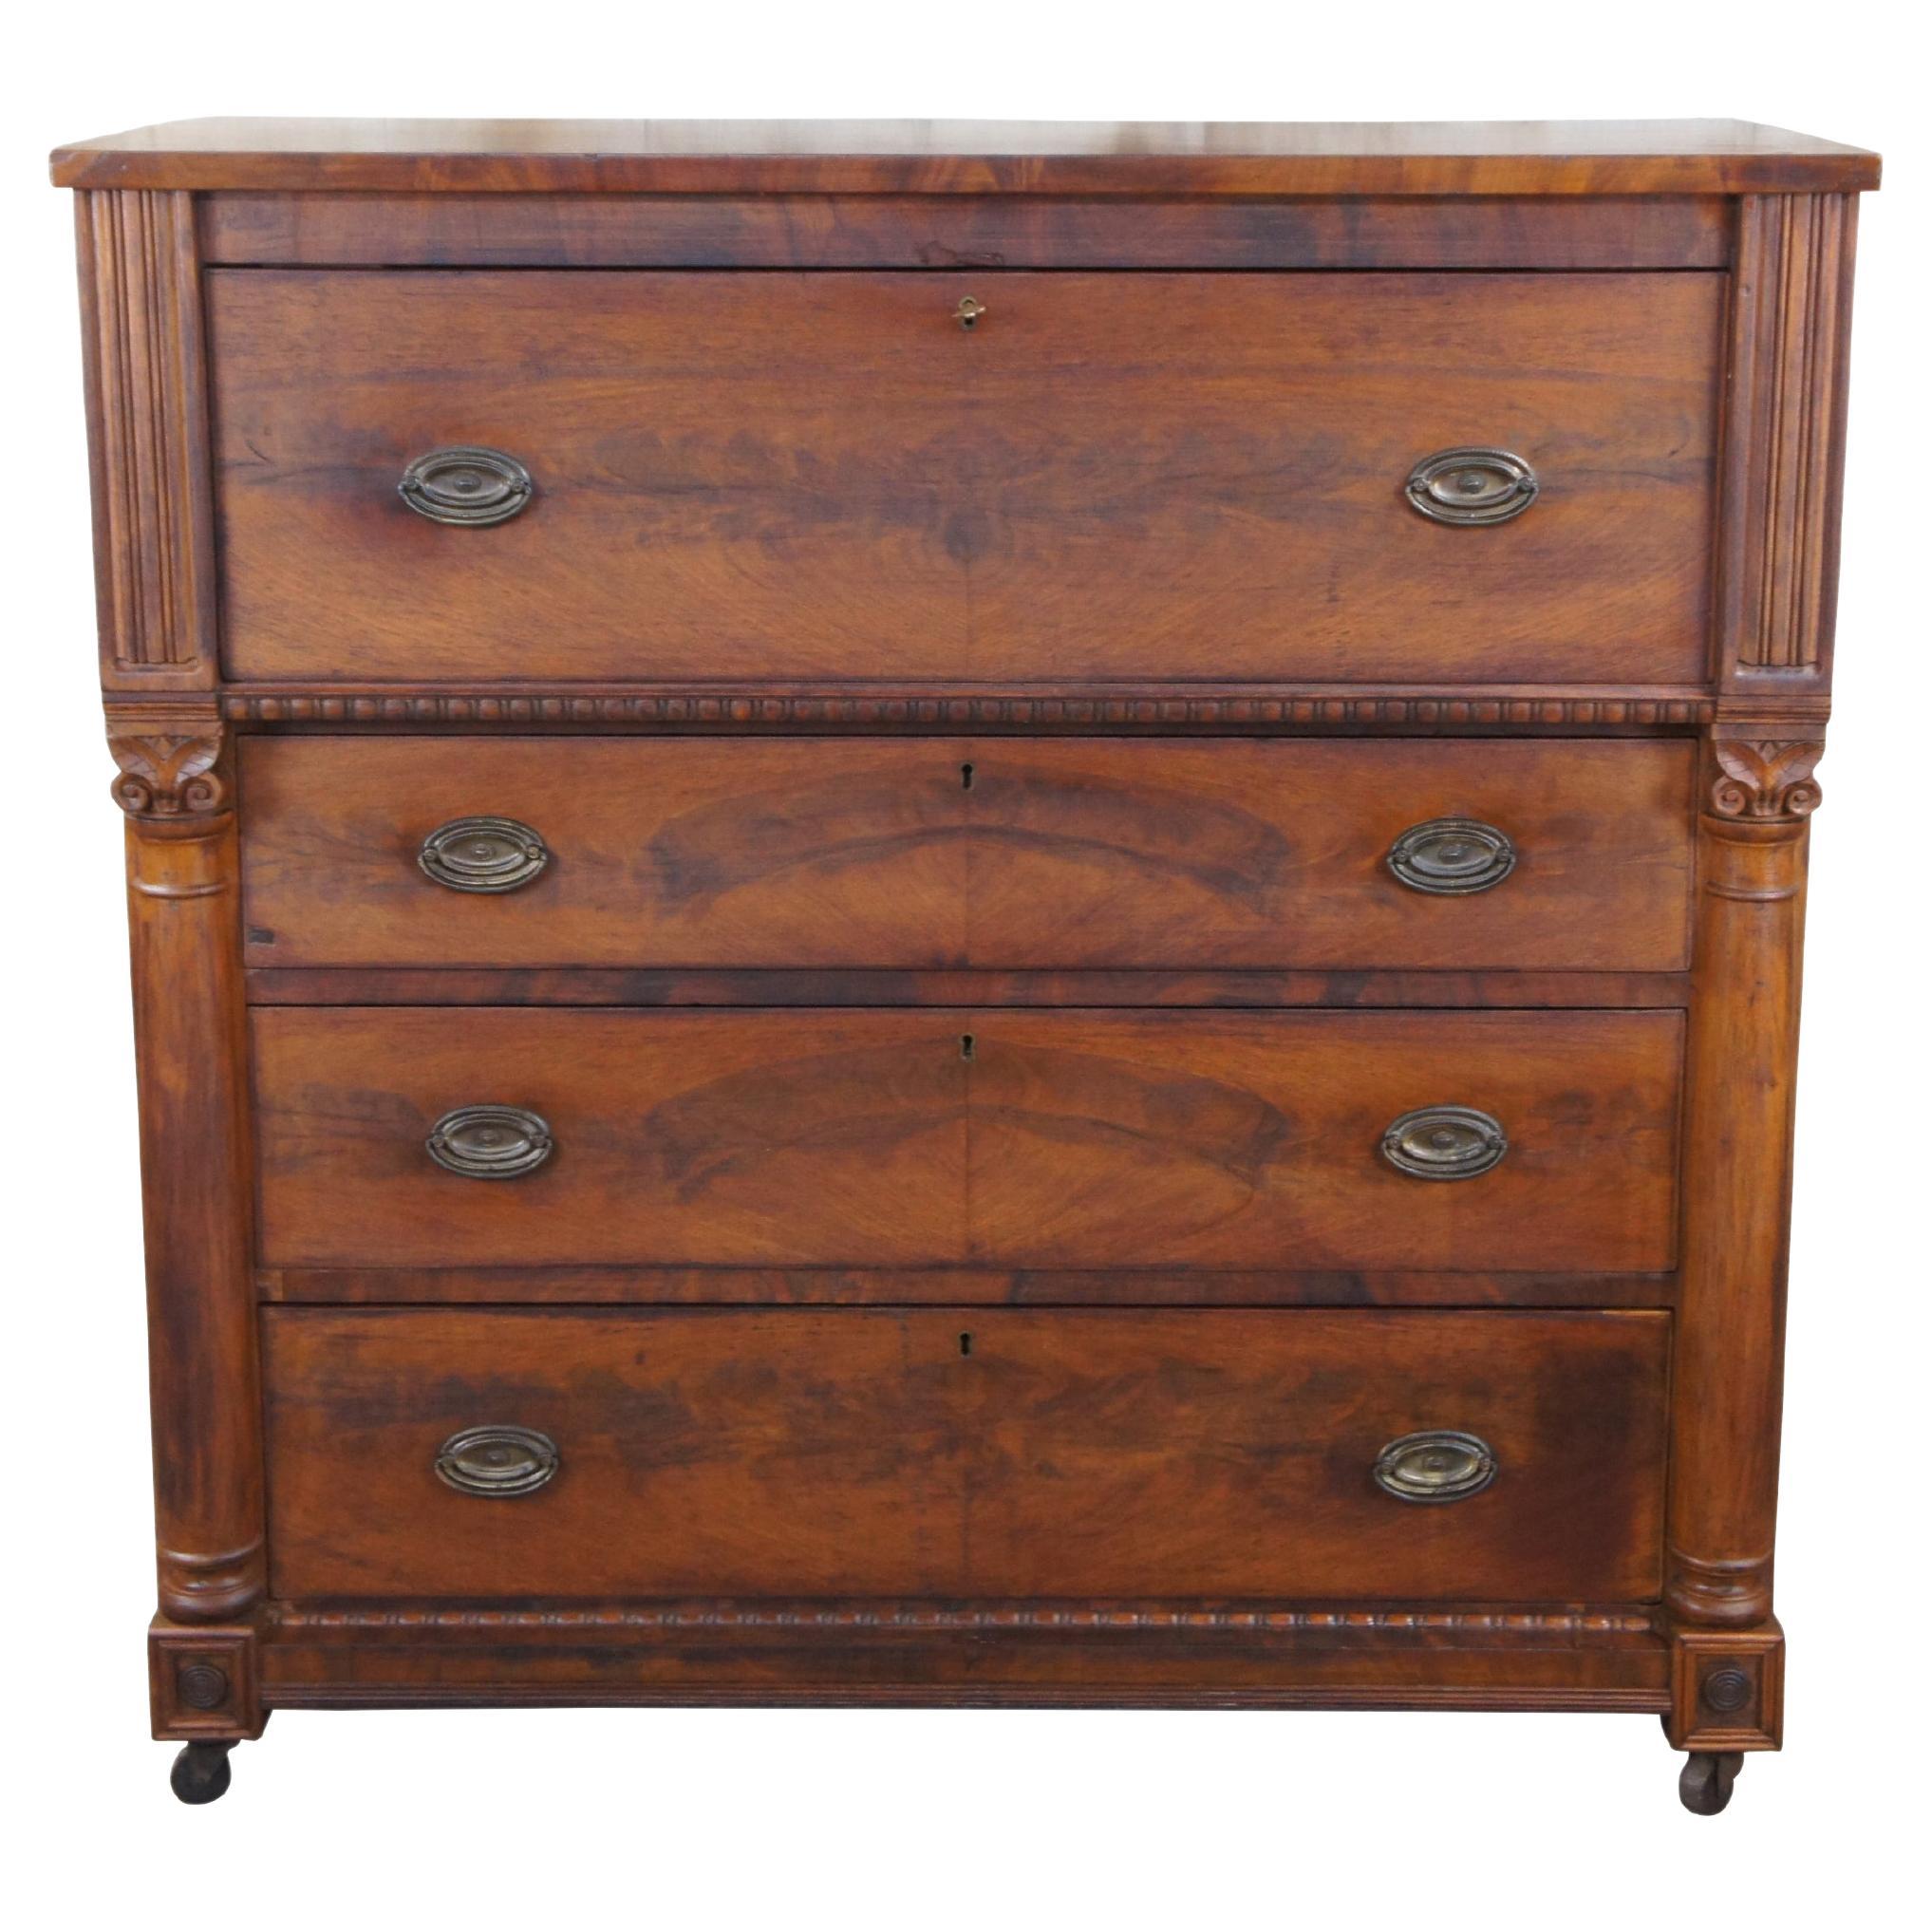 Antique 19th C. American Victorian Mahogany Tallboy Dresser Chest of Drawers